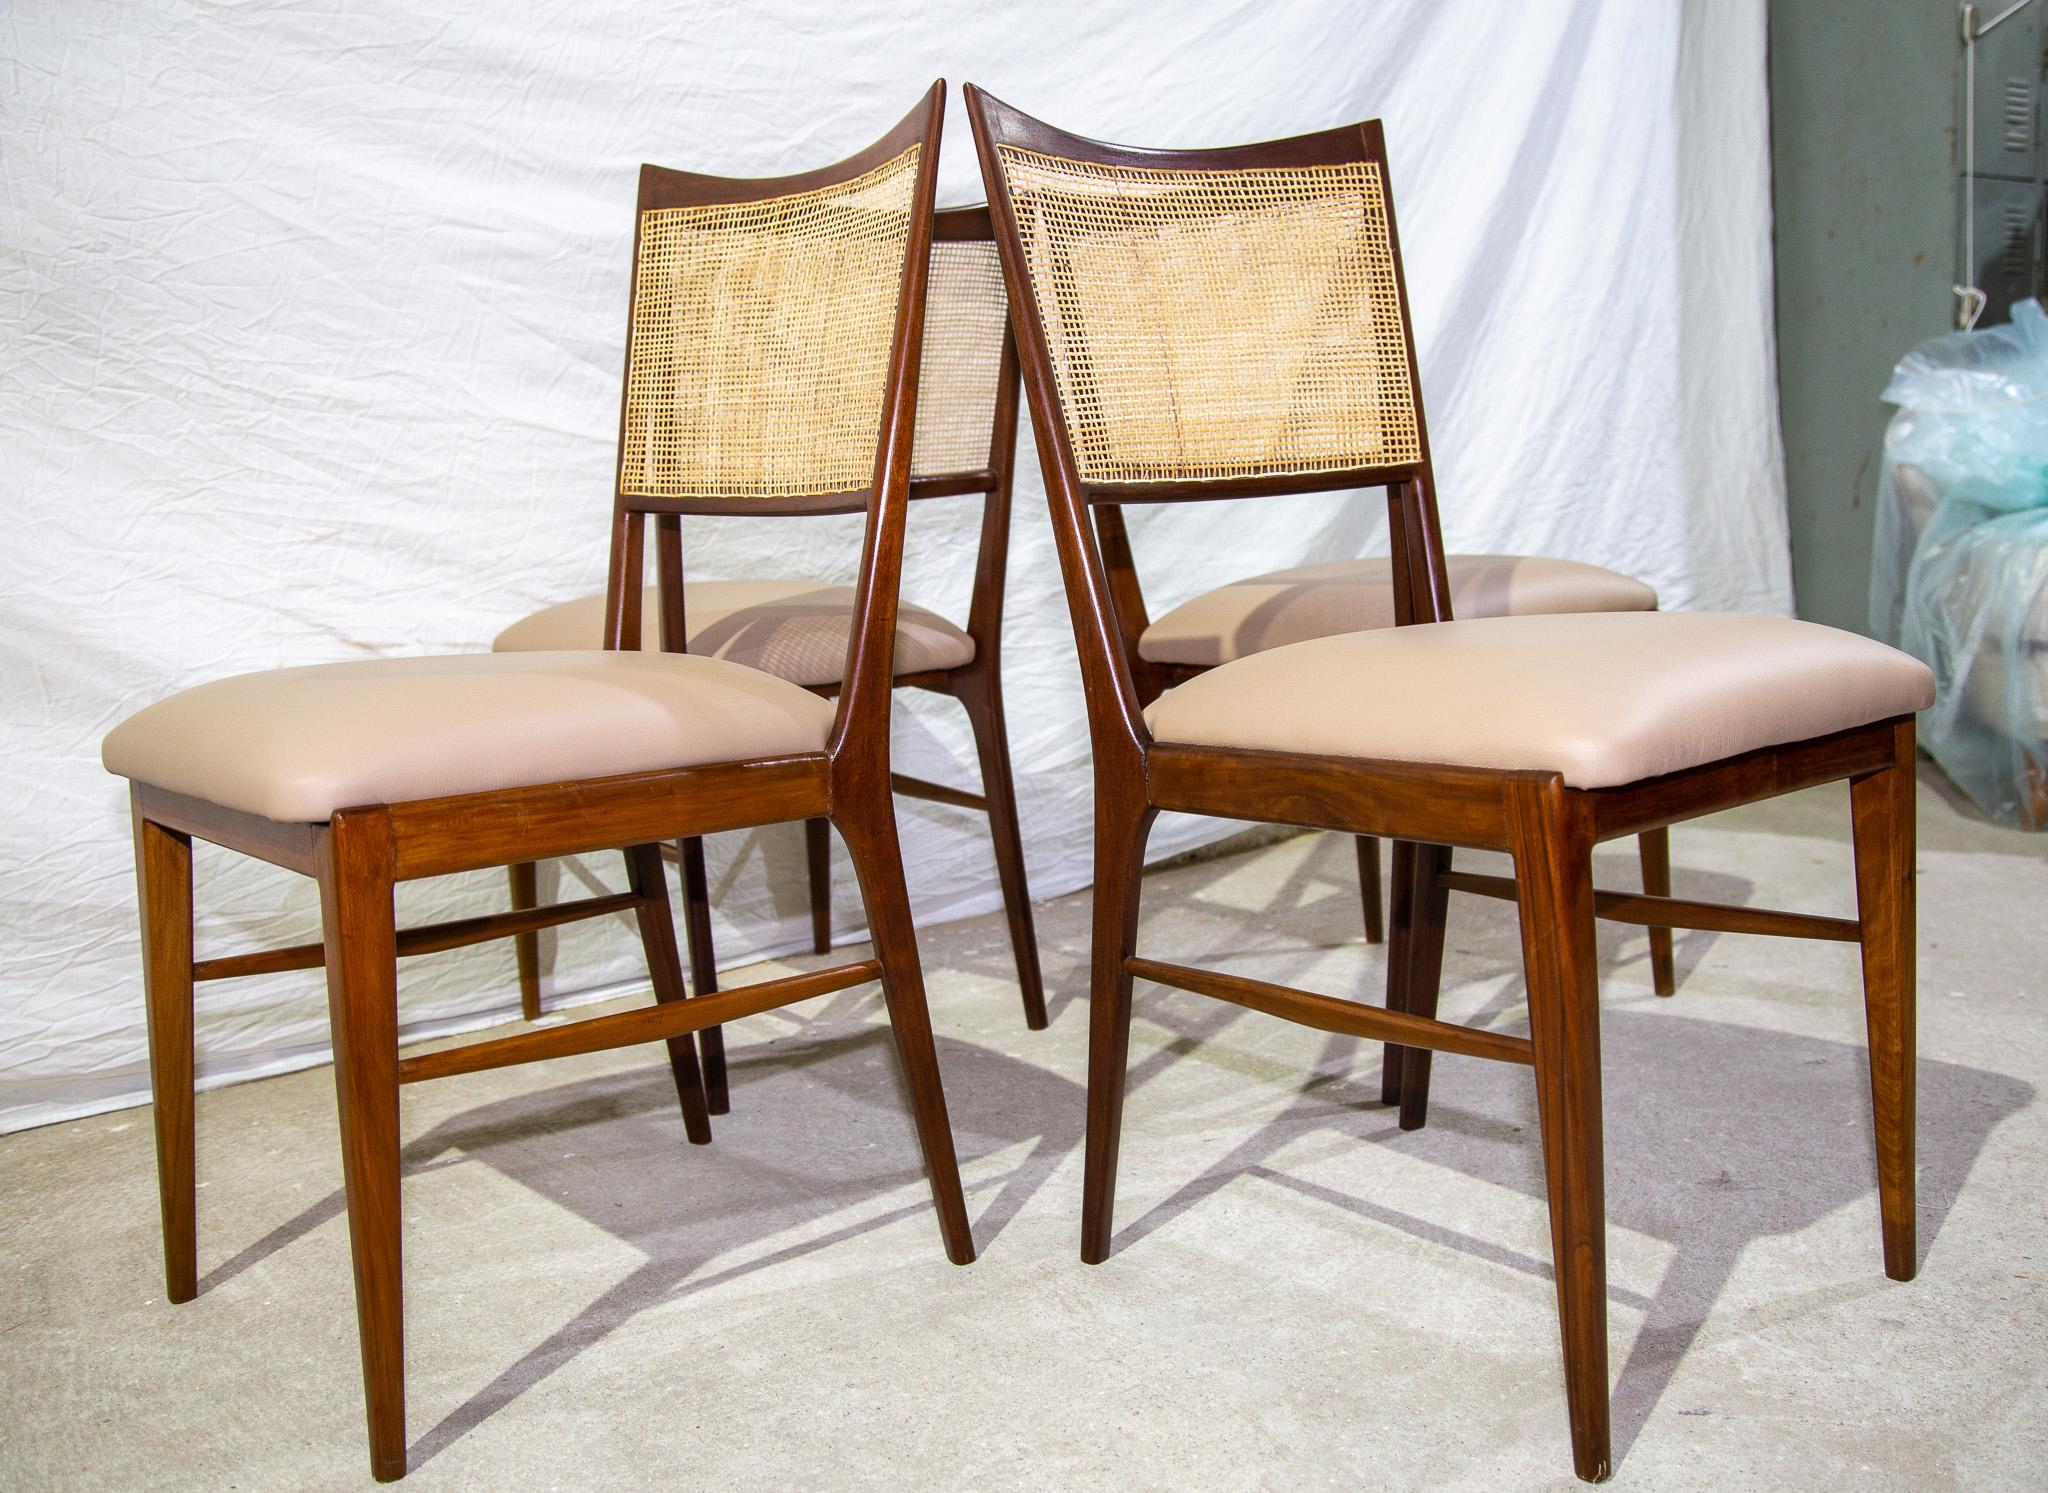 20th Century Brazilian Modern Set of Four Chairs in Hardwood & Beige Leather, Unknown, 1960s For Sale